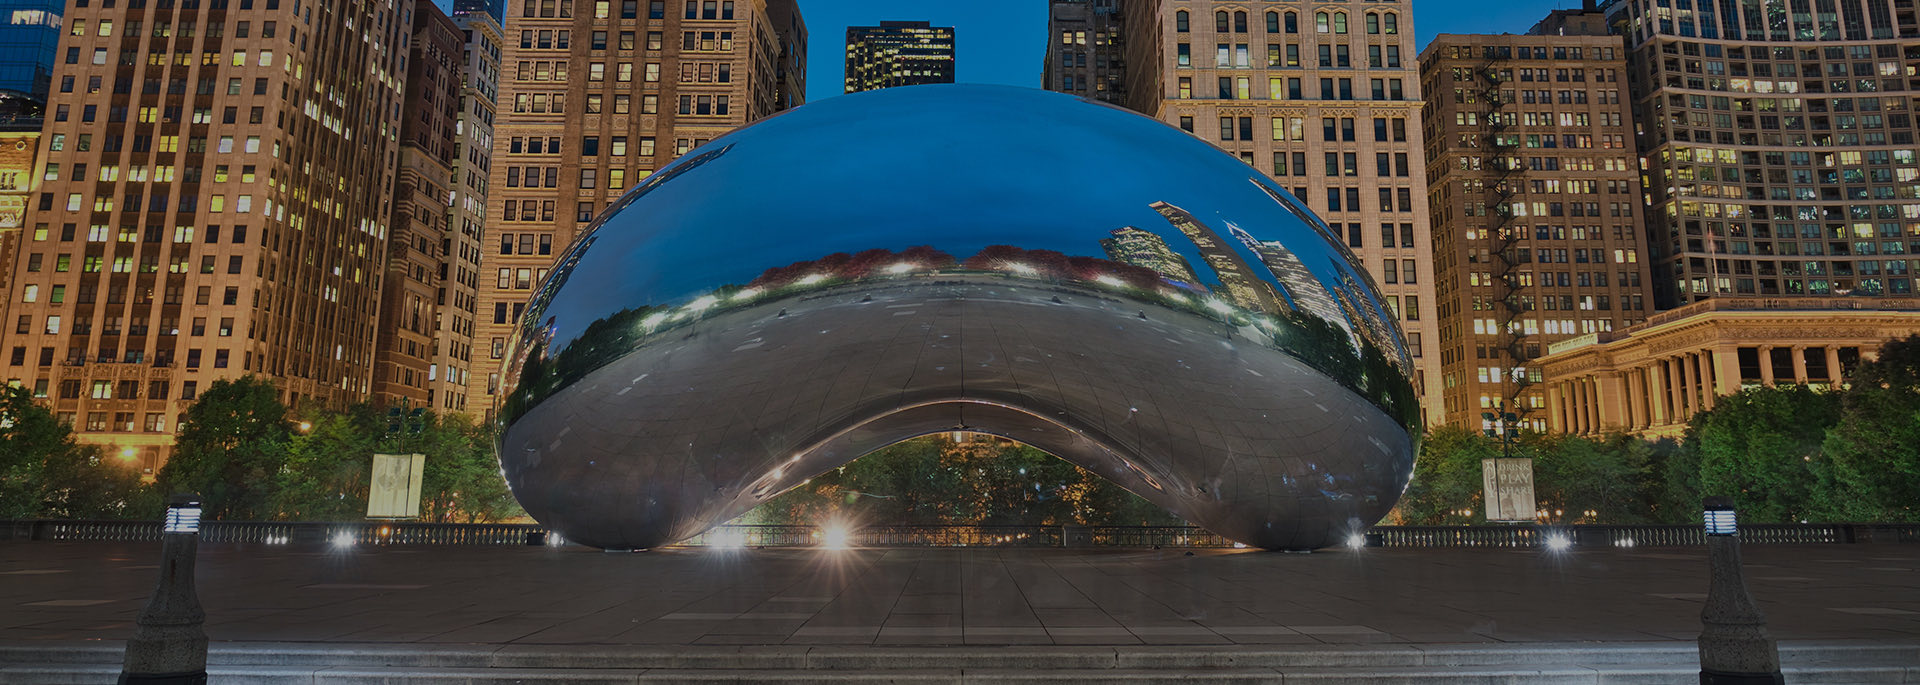 view of the chicago bean